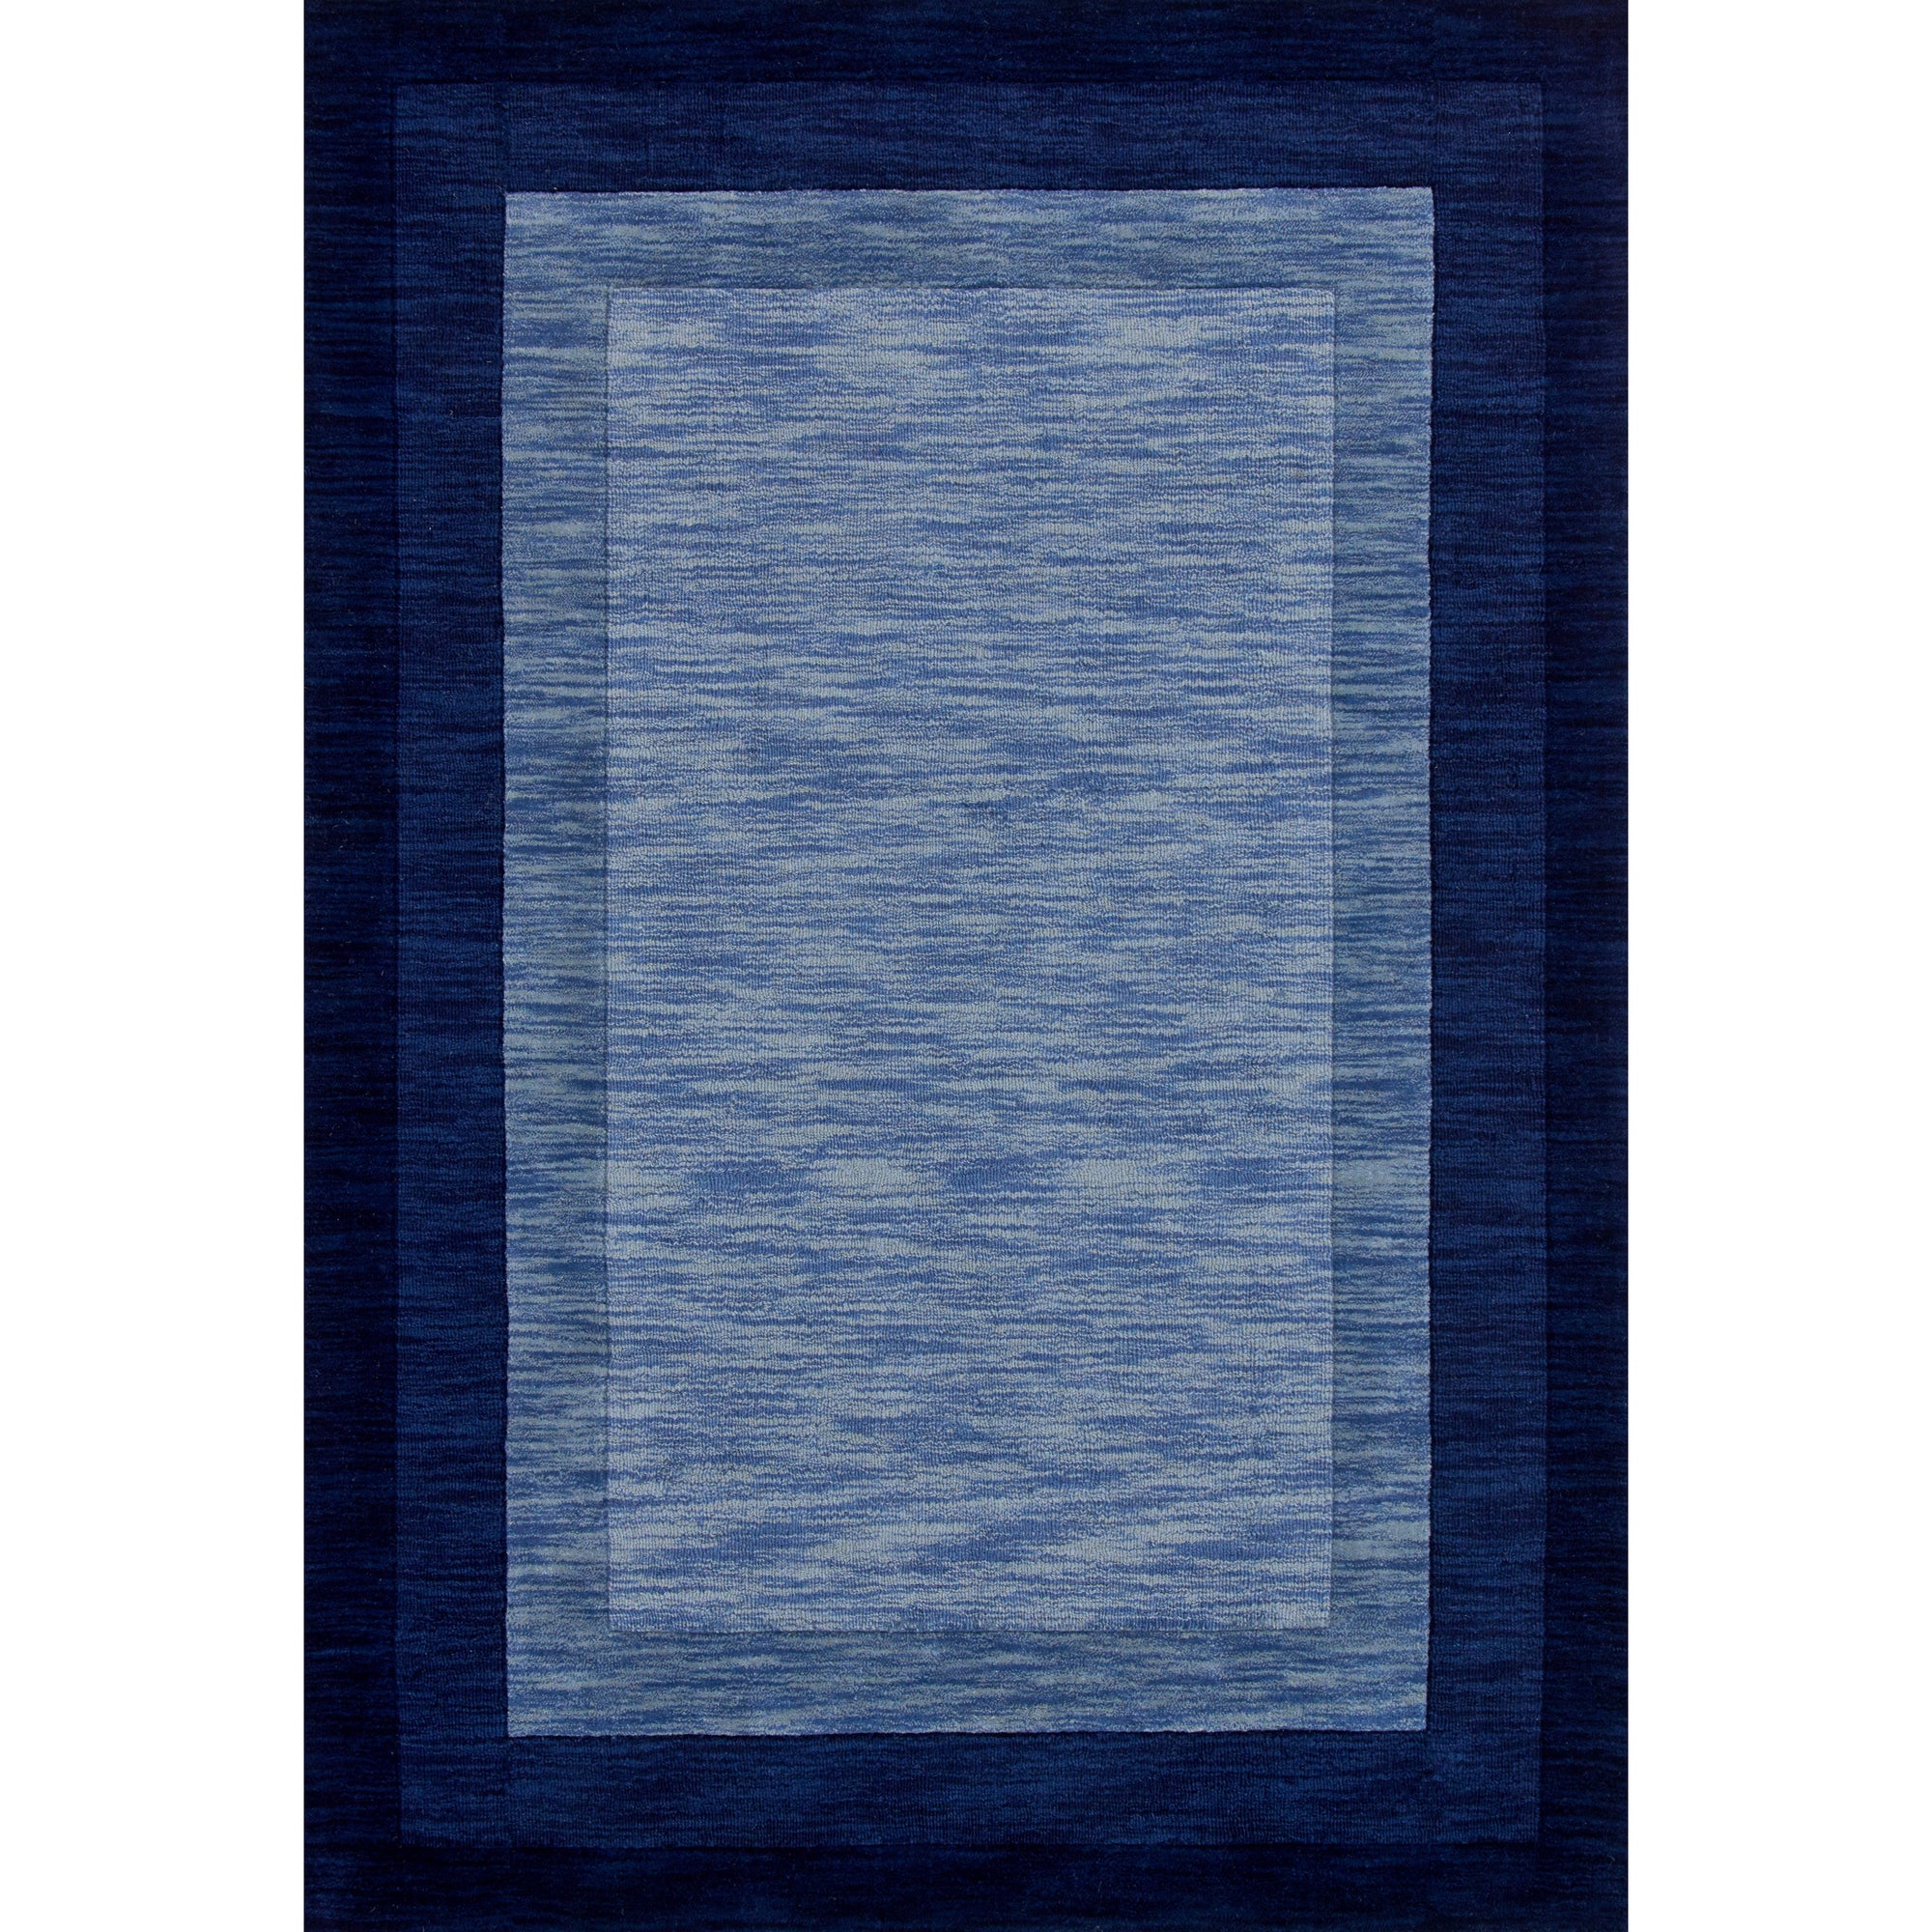 Rugs by Roo Loloi Hamilton Navy Area Rug in size 18" x 18" Sample